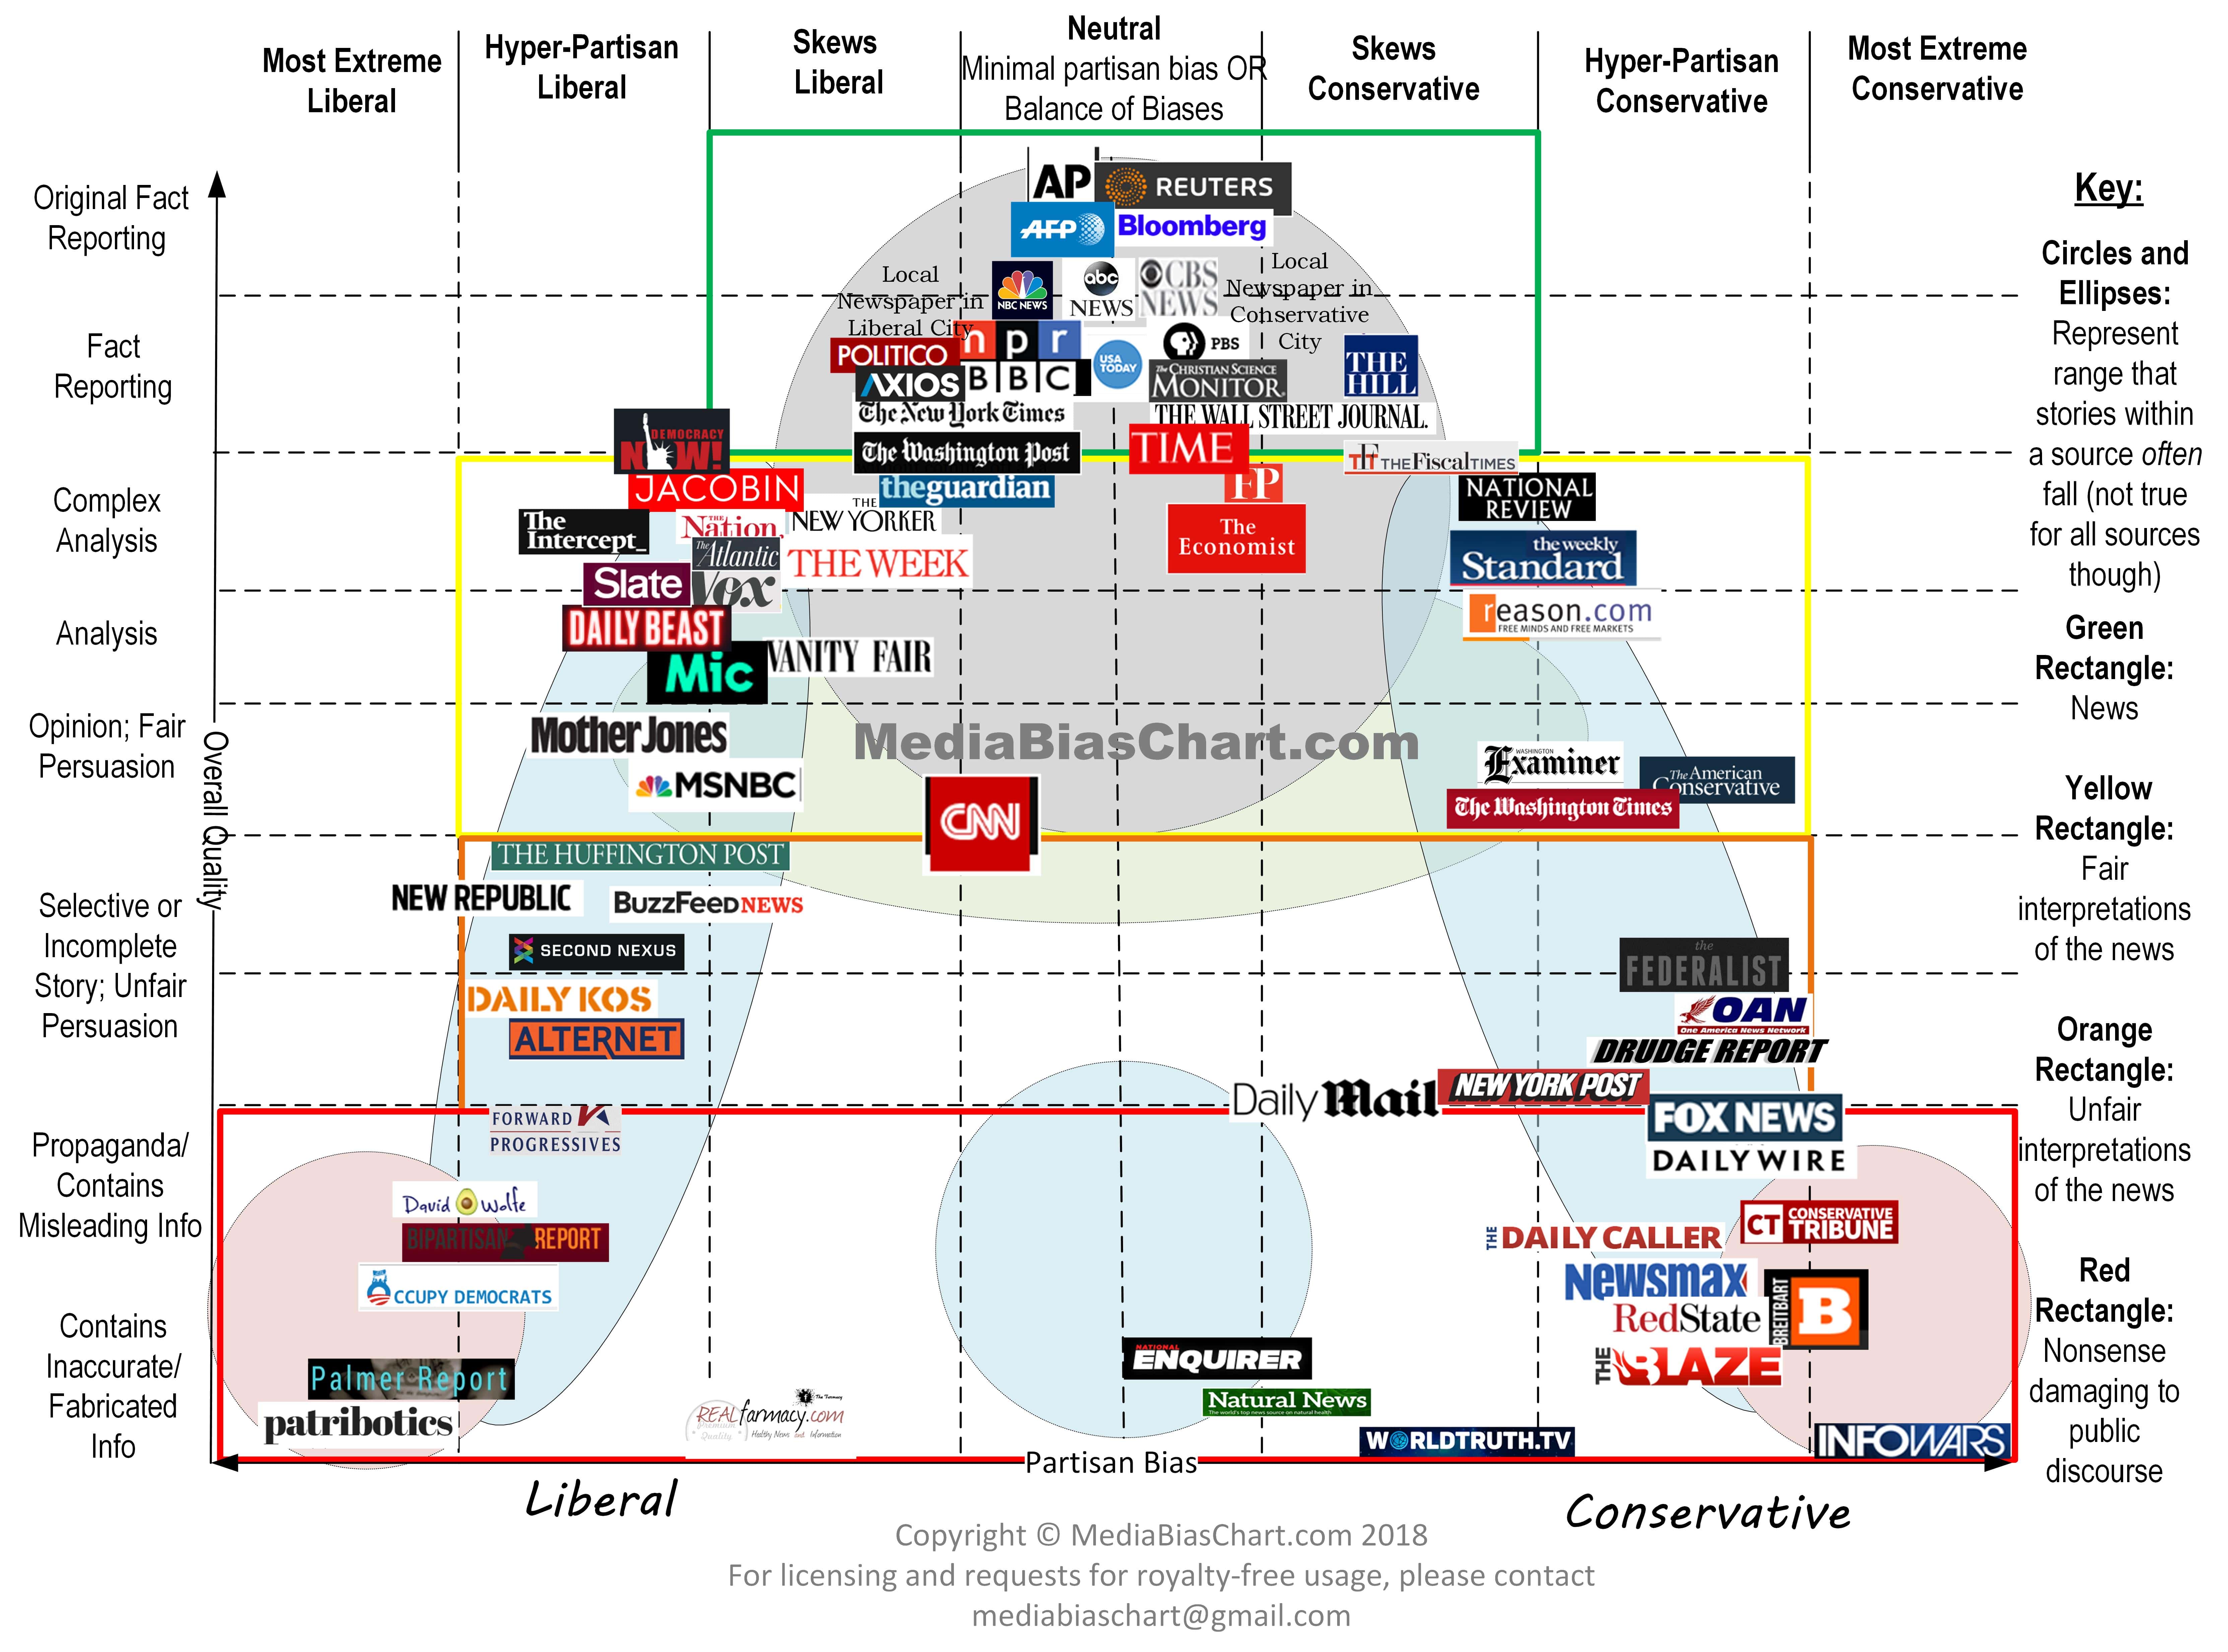 A curve from mediabiaschart.com showing the media bias, listing a great number of different media. The y-axis shows the Overall Quality from "contains inaccurate/fabricated info" to "original fact reporting", the x-axis the Partisan Bias from liberal to conservative.